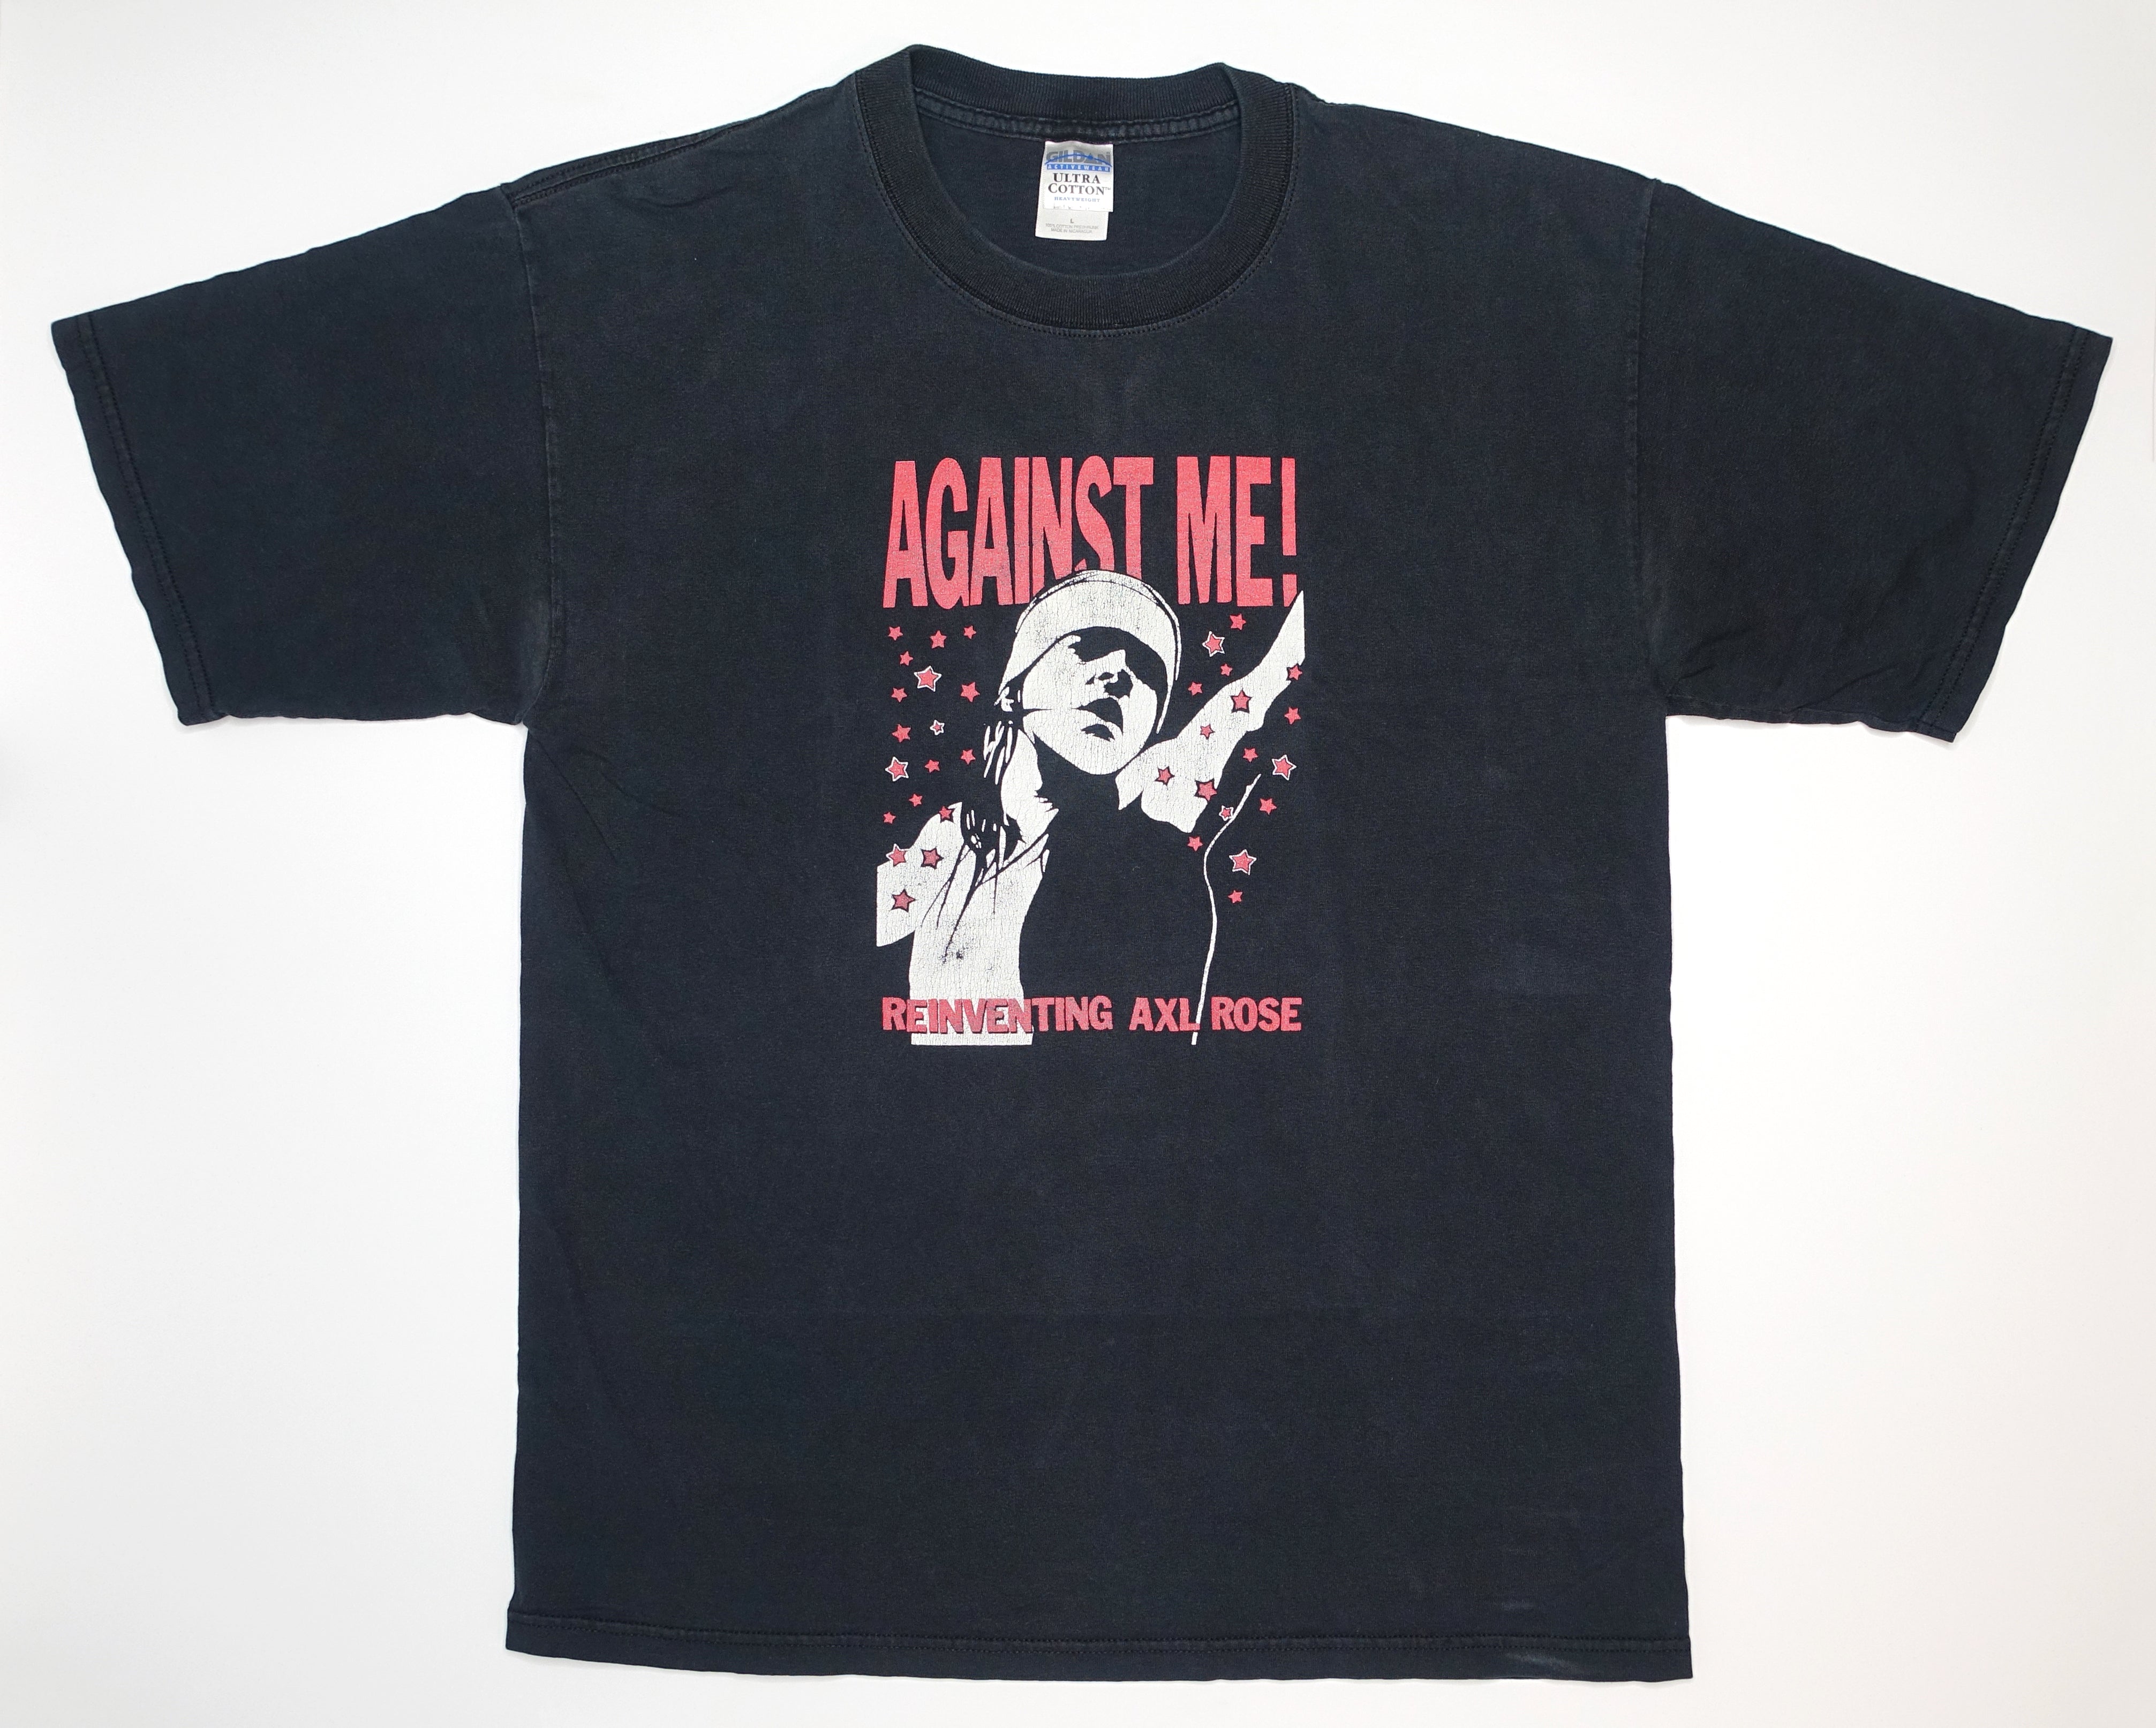 Against Me! - Reinventing Axl Rose Cover 2002 Tour Shirt Size Large